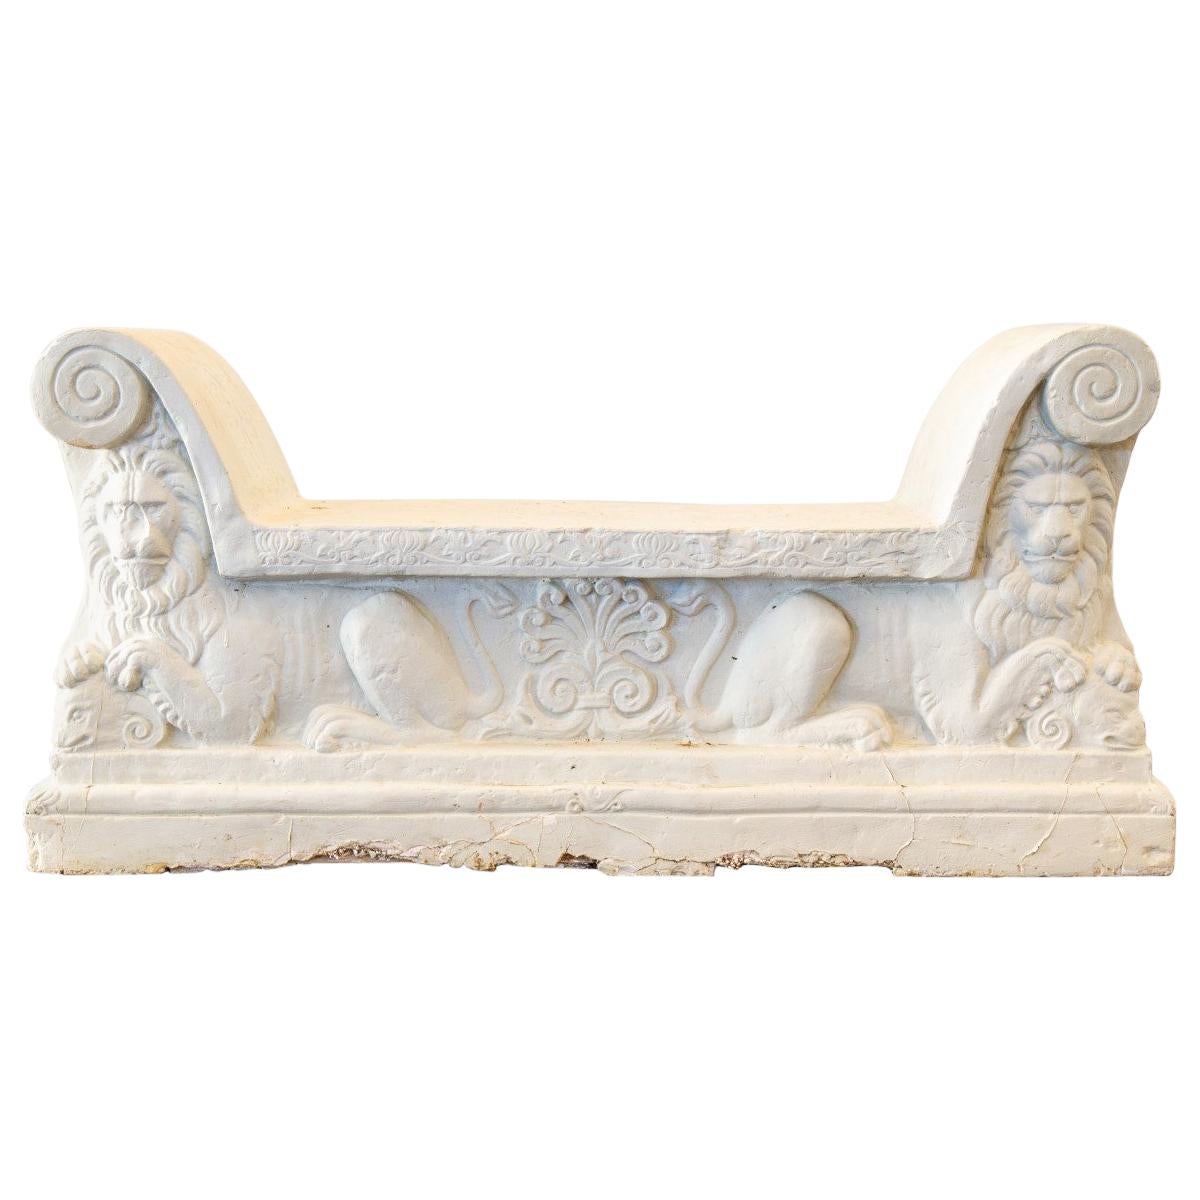 Unique Hard Plaster Maquette of an 18th Century Italian Marble Bench